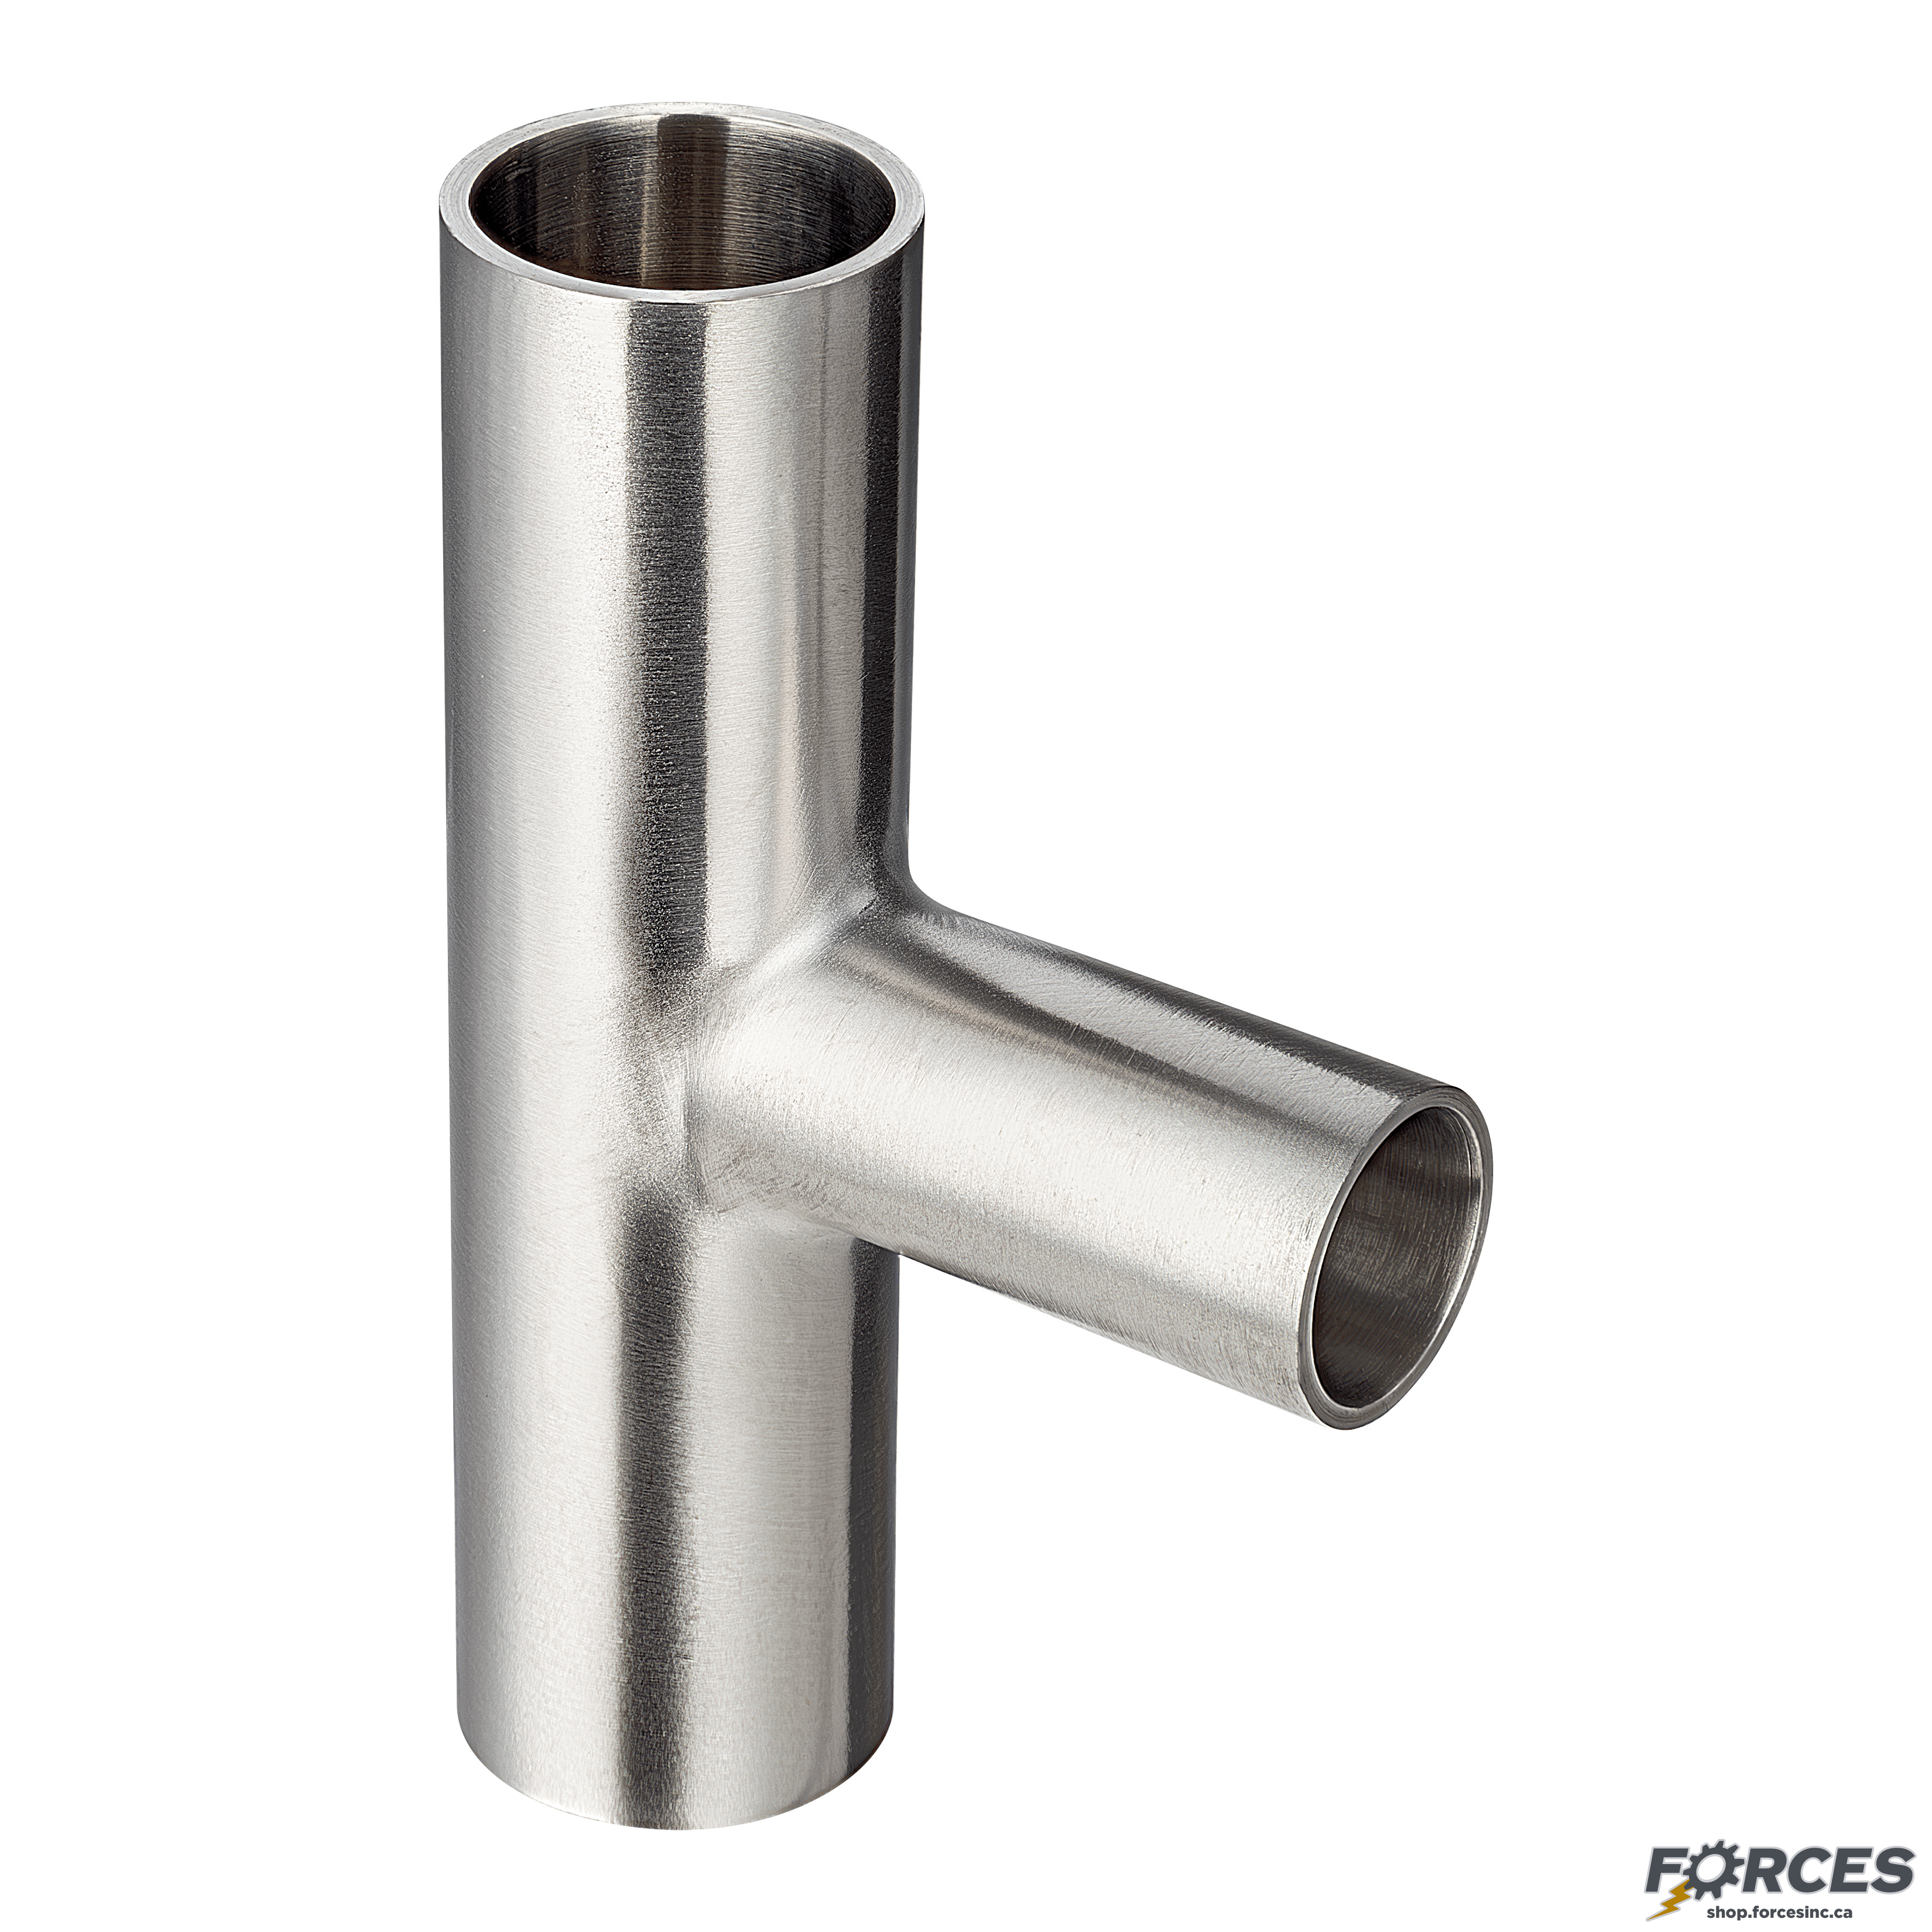 4" x 1" Butt Weld Tee Reducer - Stainless Steel 316 - Forces Inc